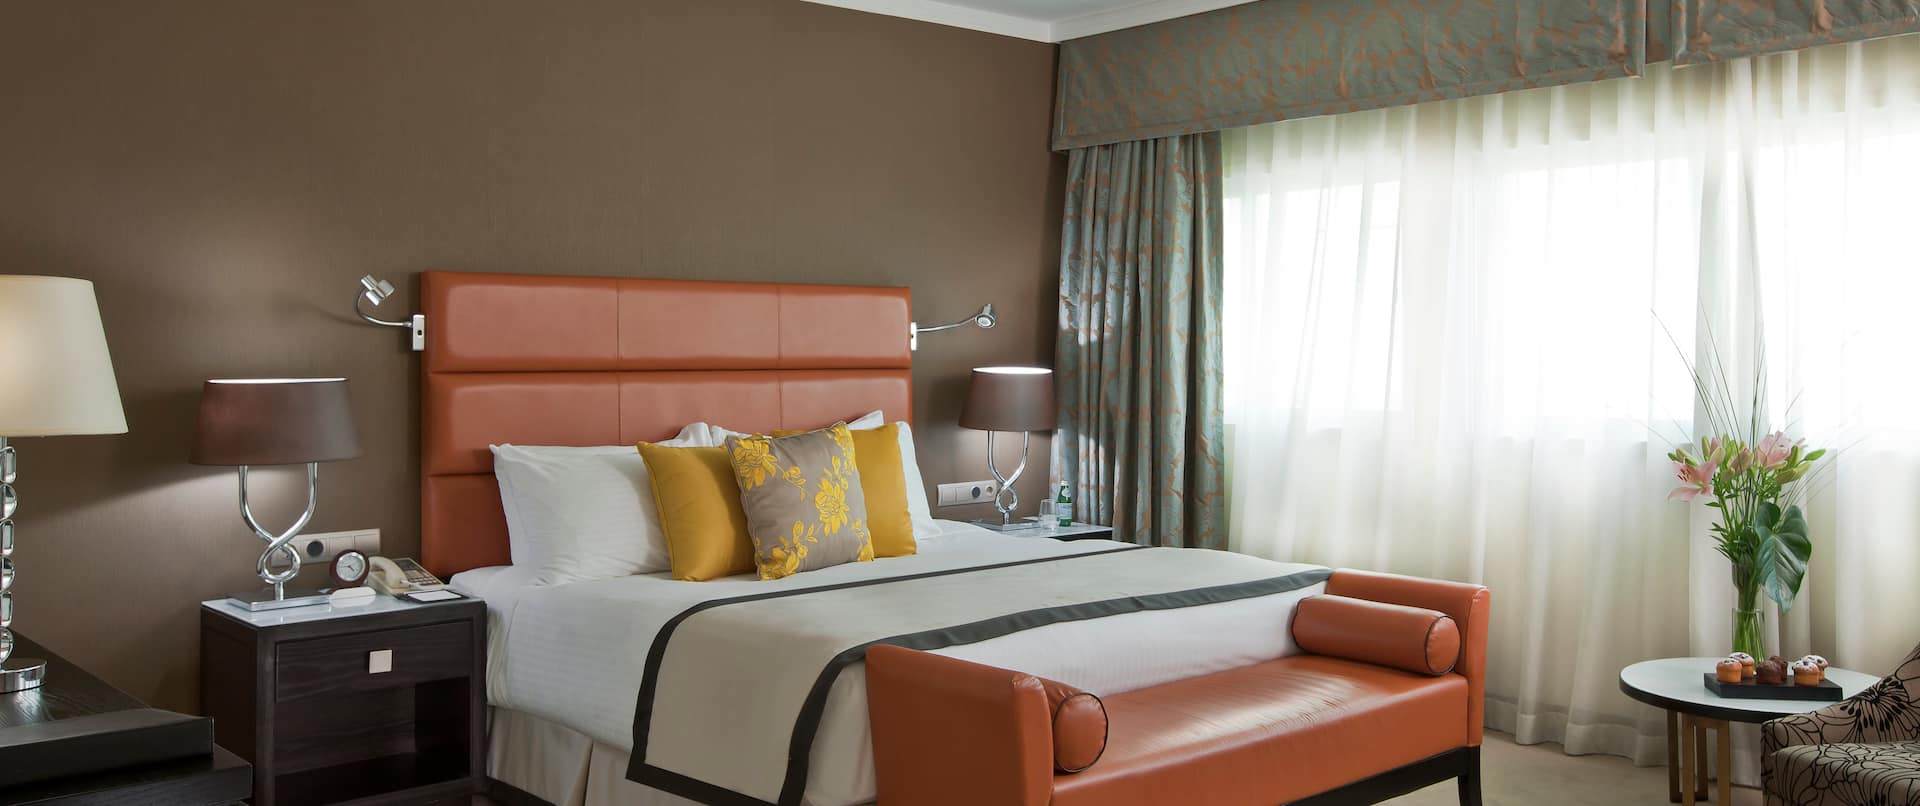 Diplomat Suite Bedroom with King Bed and Lounge Seating